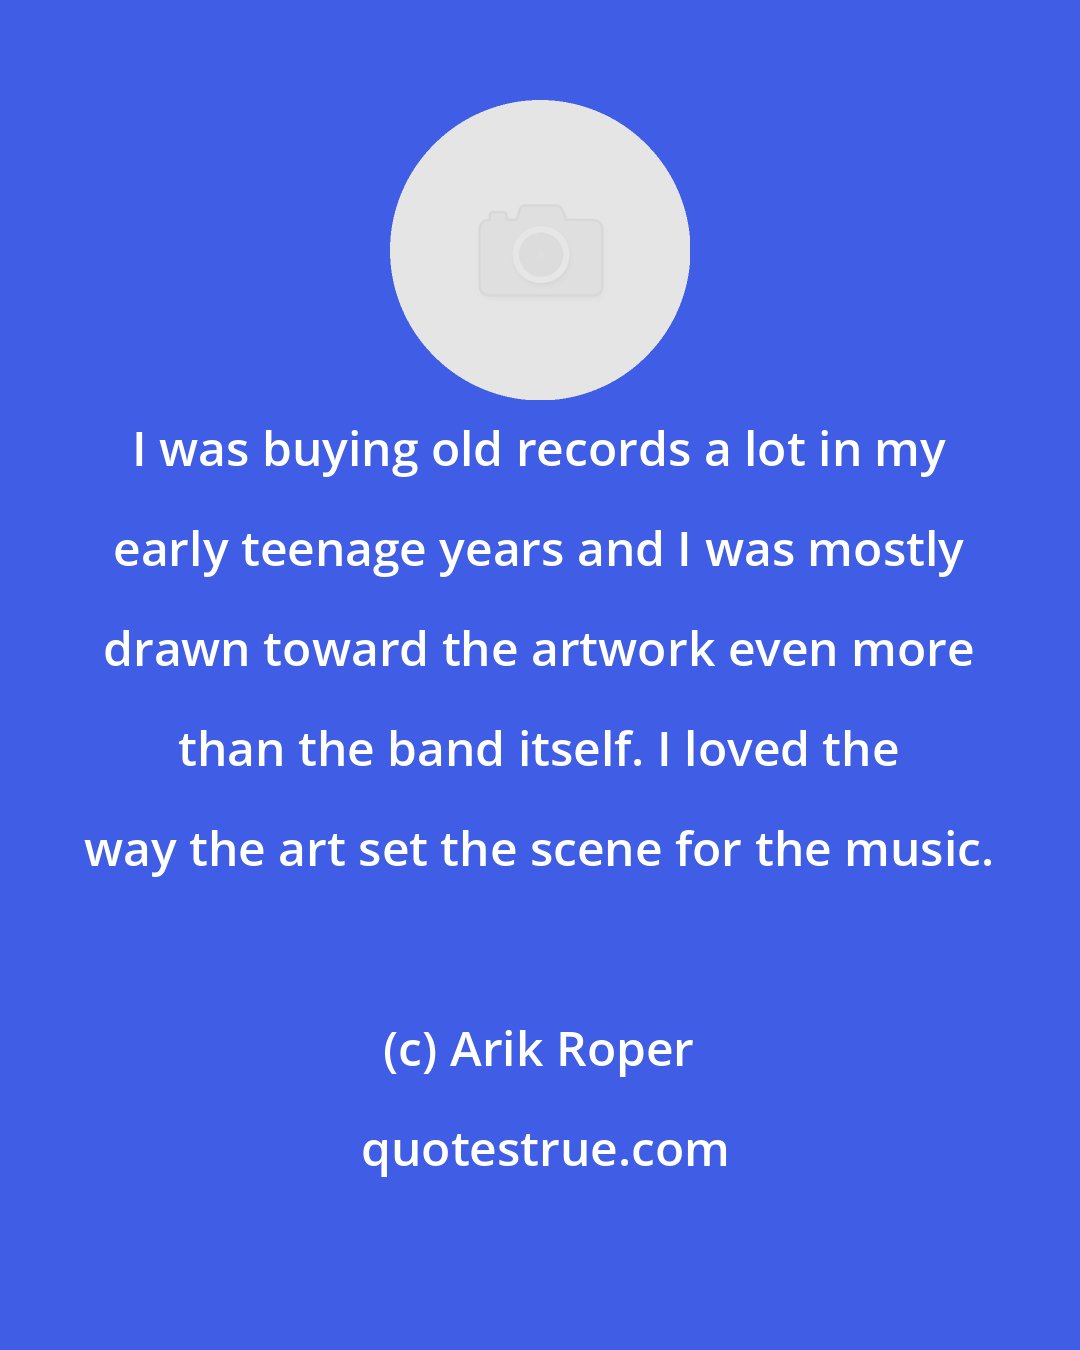 Arik Roper: I was buying old records a lot in my early teenage years and I was mostly drawn toward the artwork even more than the band itself. I loved the way the art set the scene for the music.